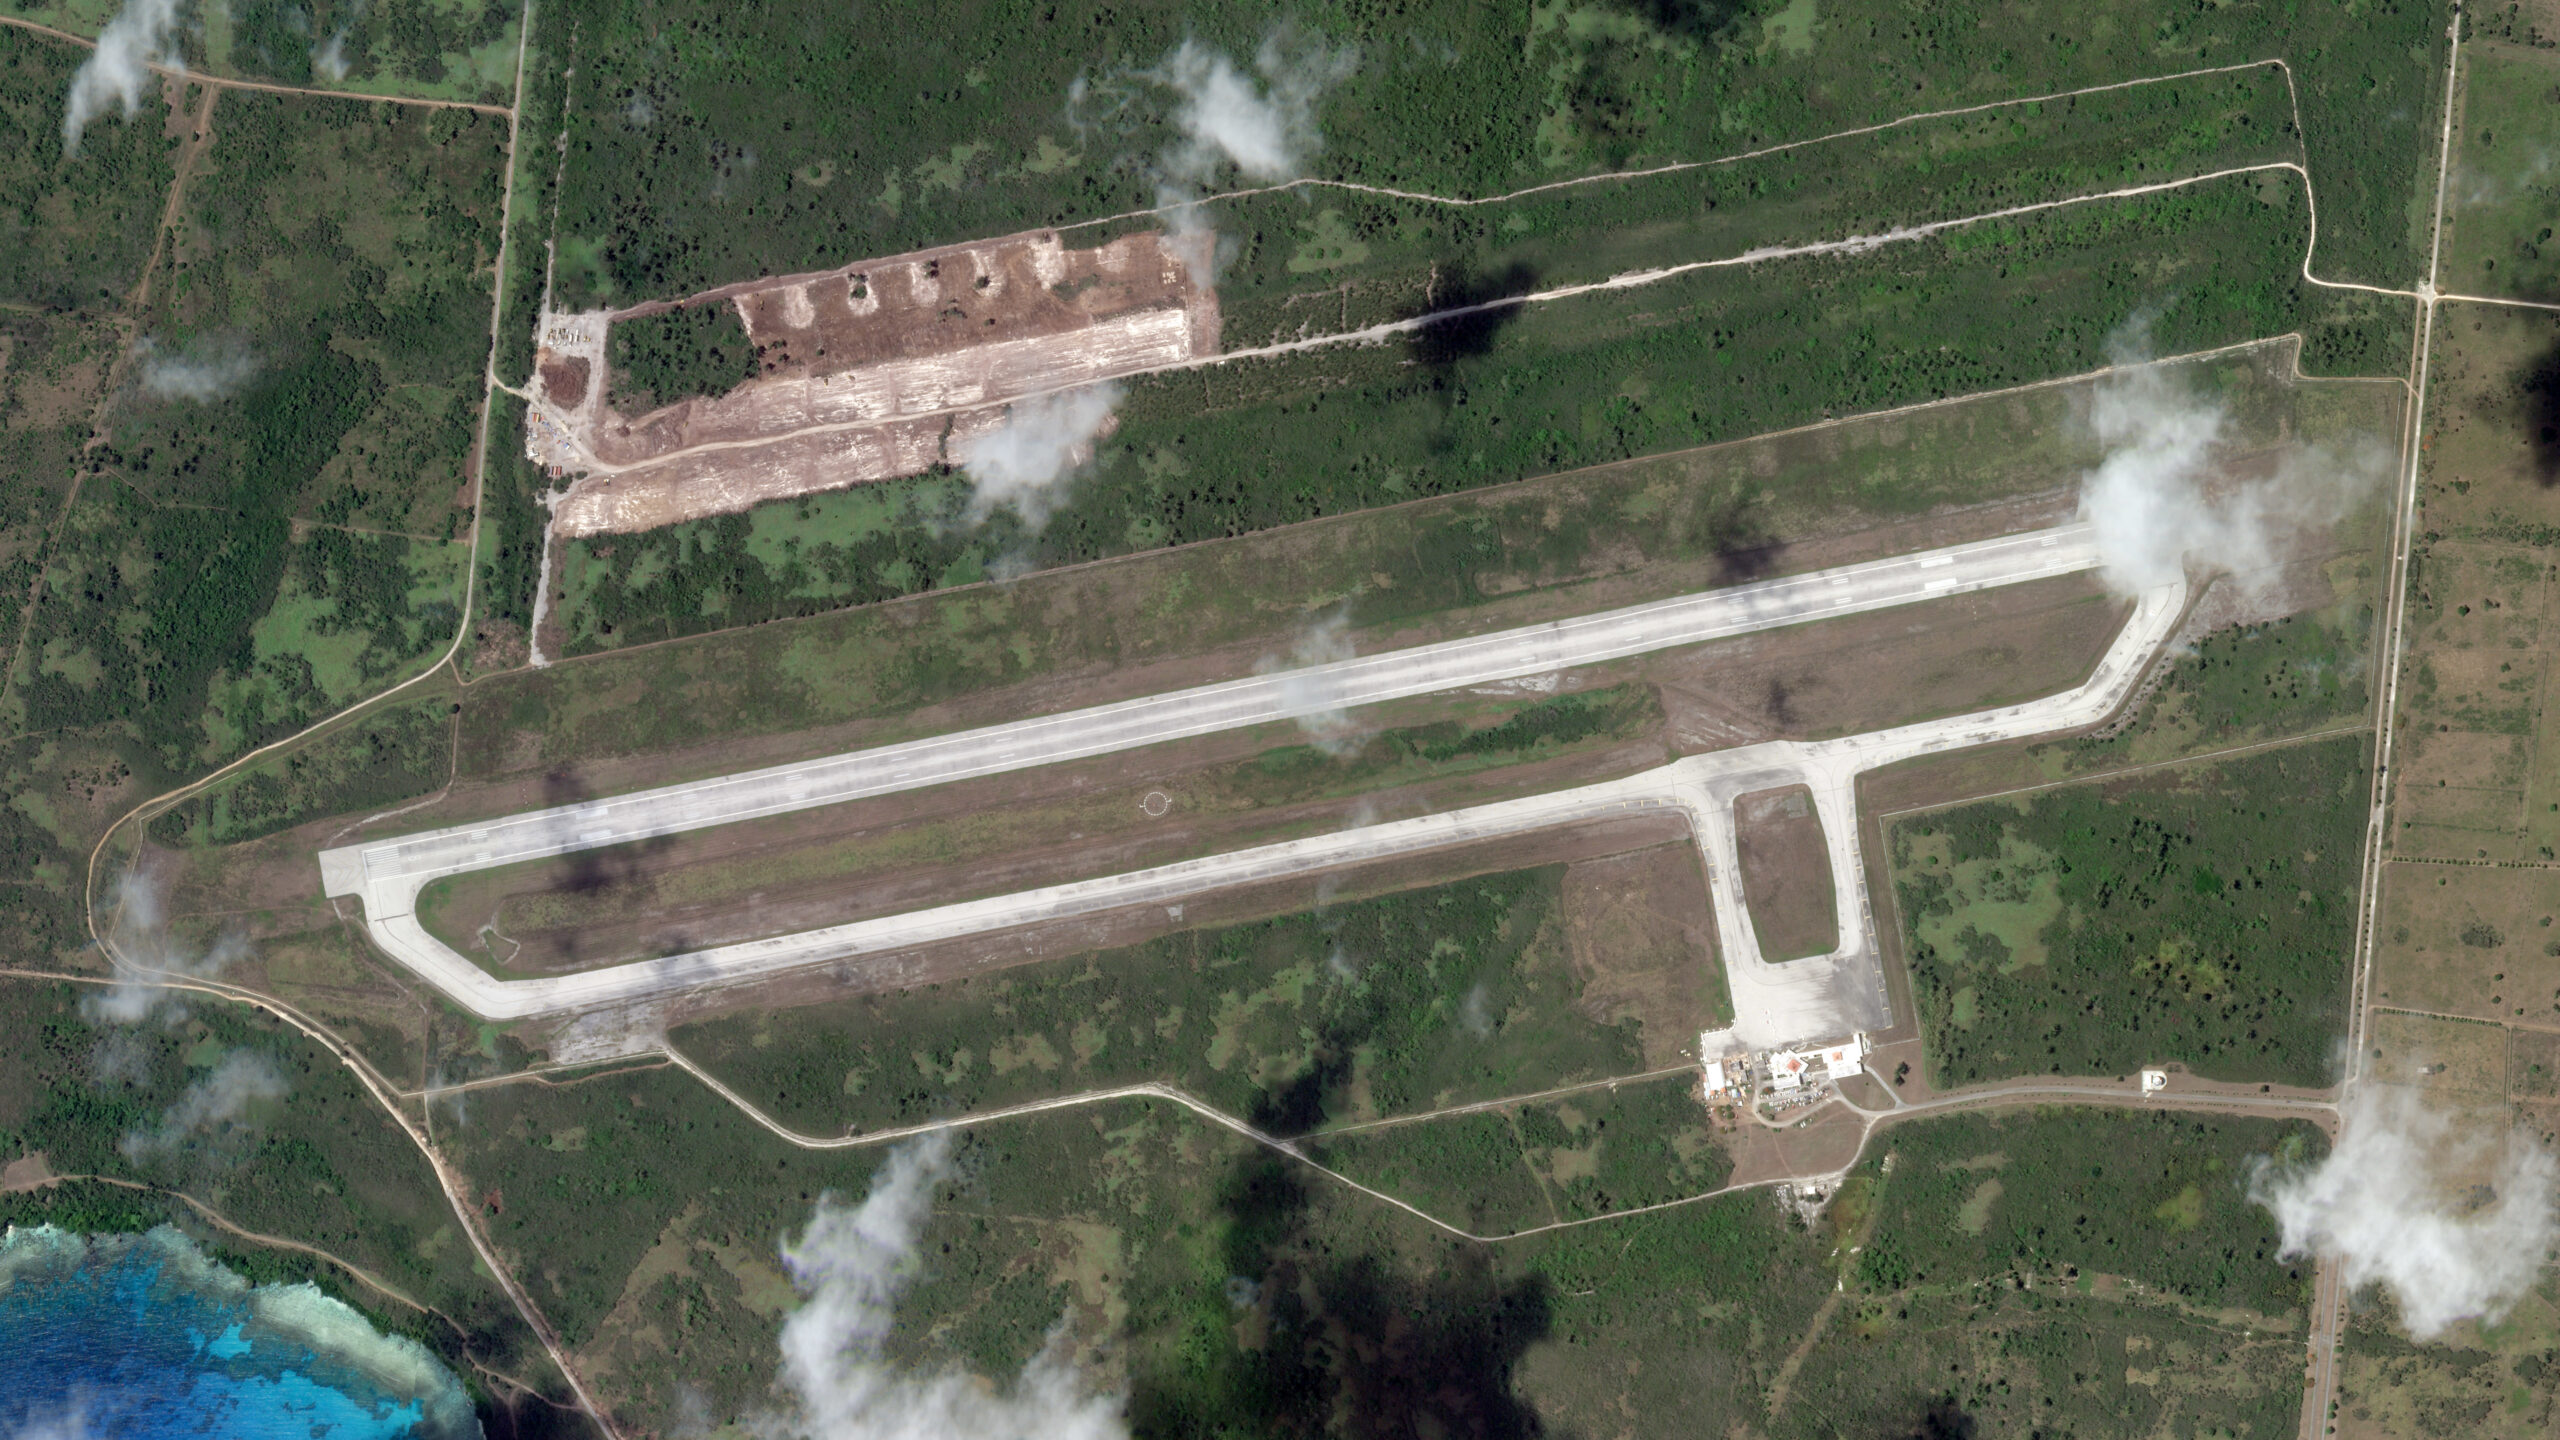 tinian-airfield-construction-full-view-scaled.jpg